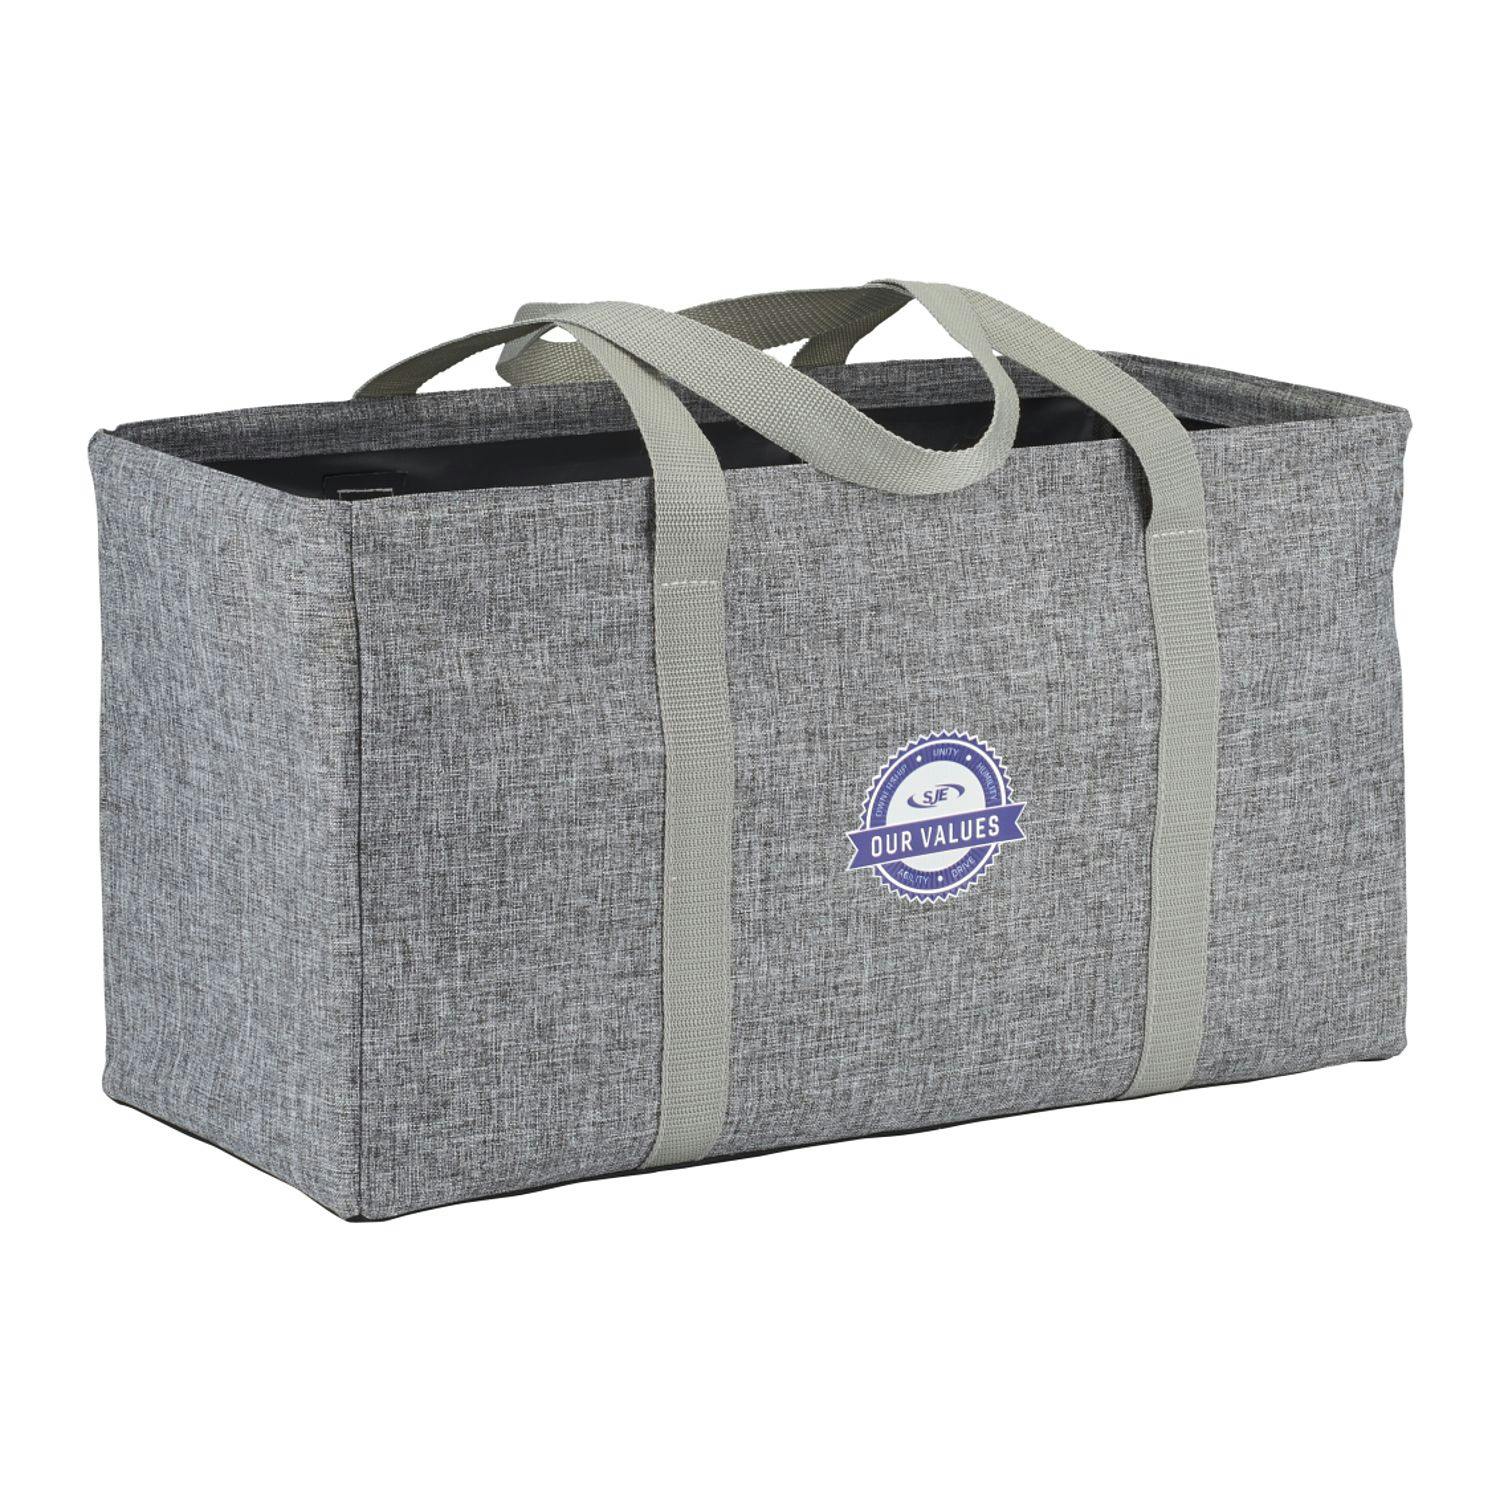 Oversized Carry-All Tote - additional Image 1